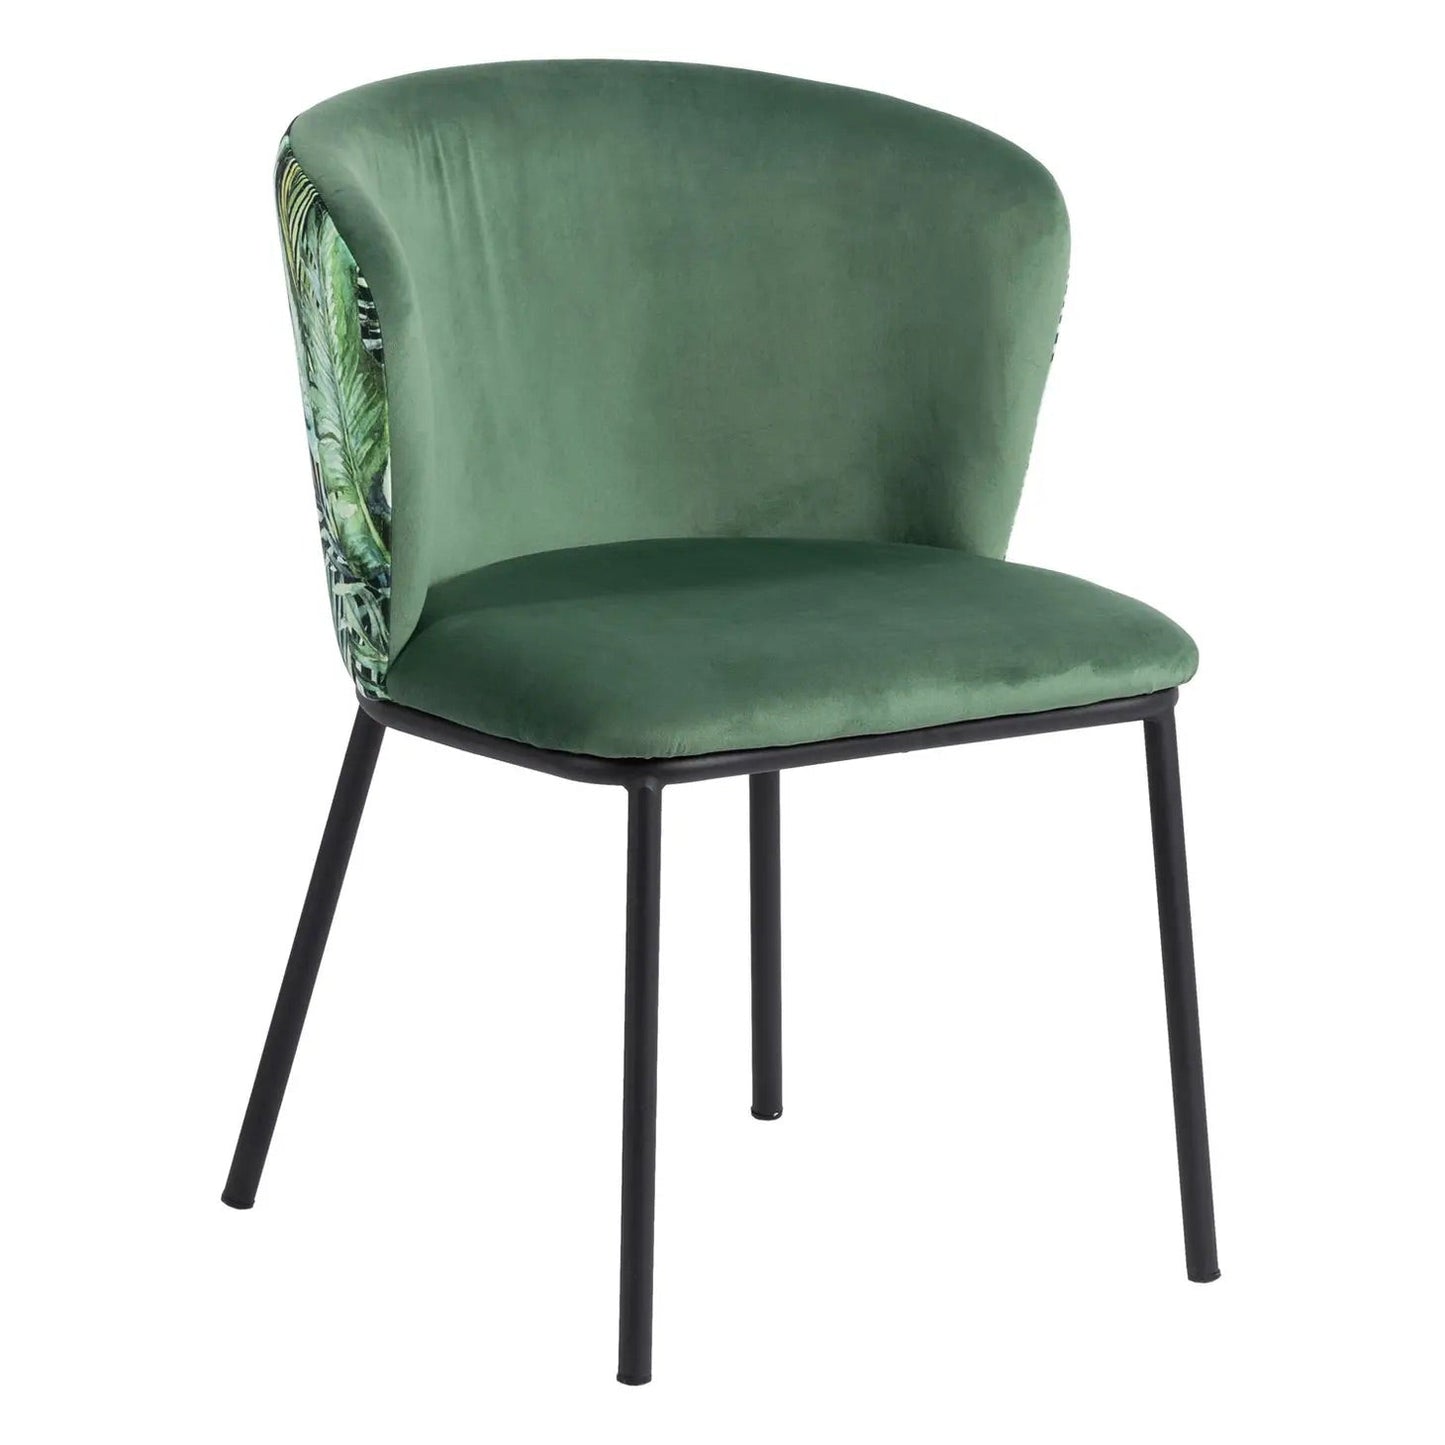 Green Floral Leaf Print Dining Chair, Black Metal Finish (S/2)